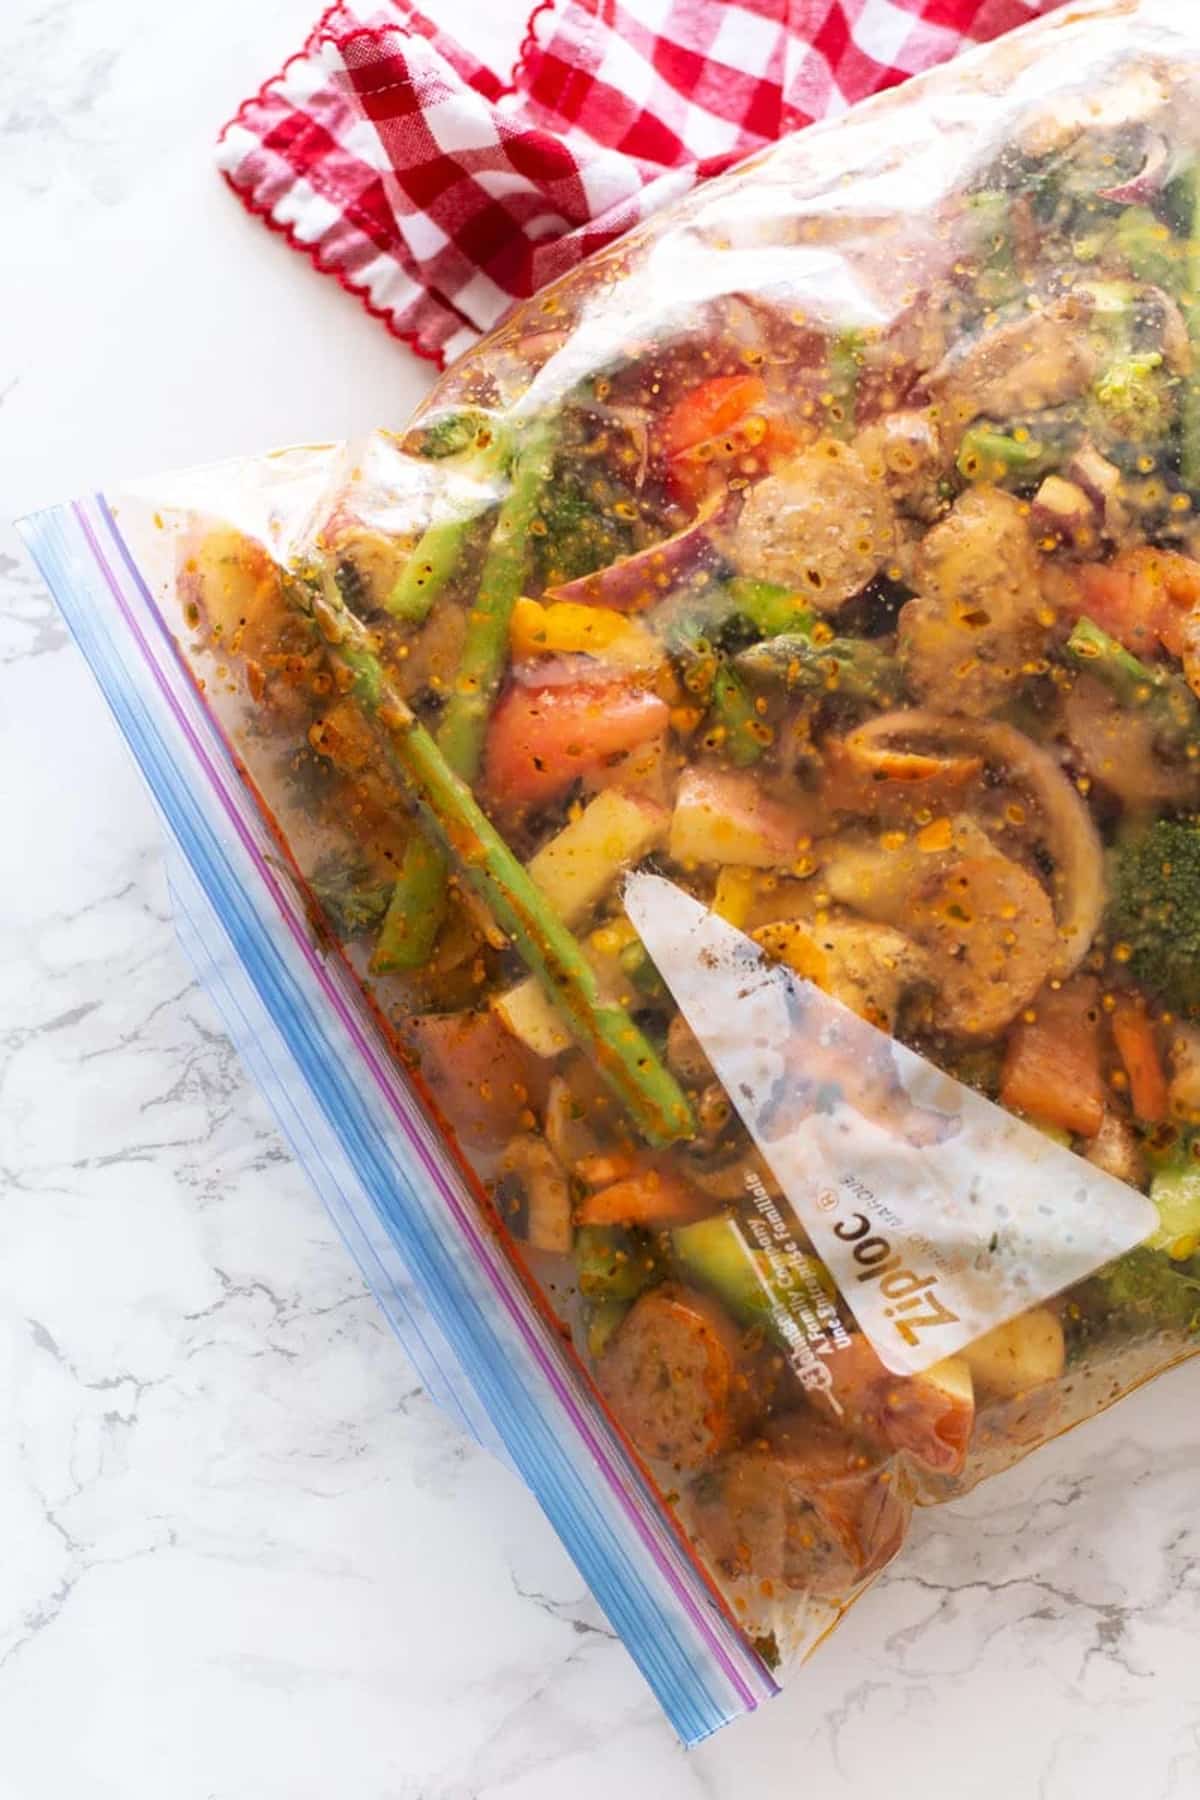 Ziplock bag containing One Pan Smoked Sausage and Vegetables in a lemon herb marinade sitting on white marble counter.